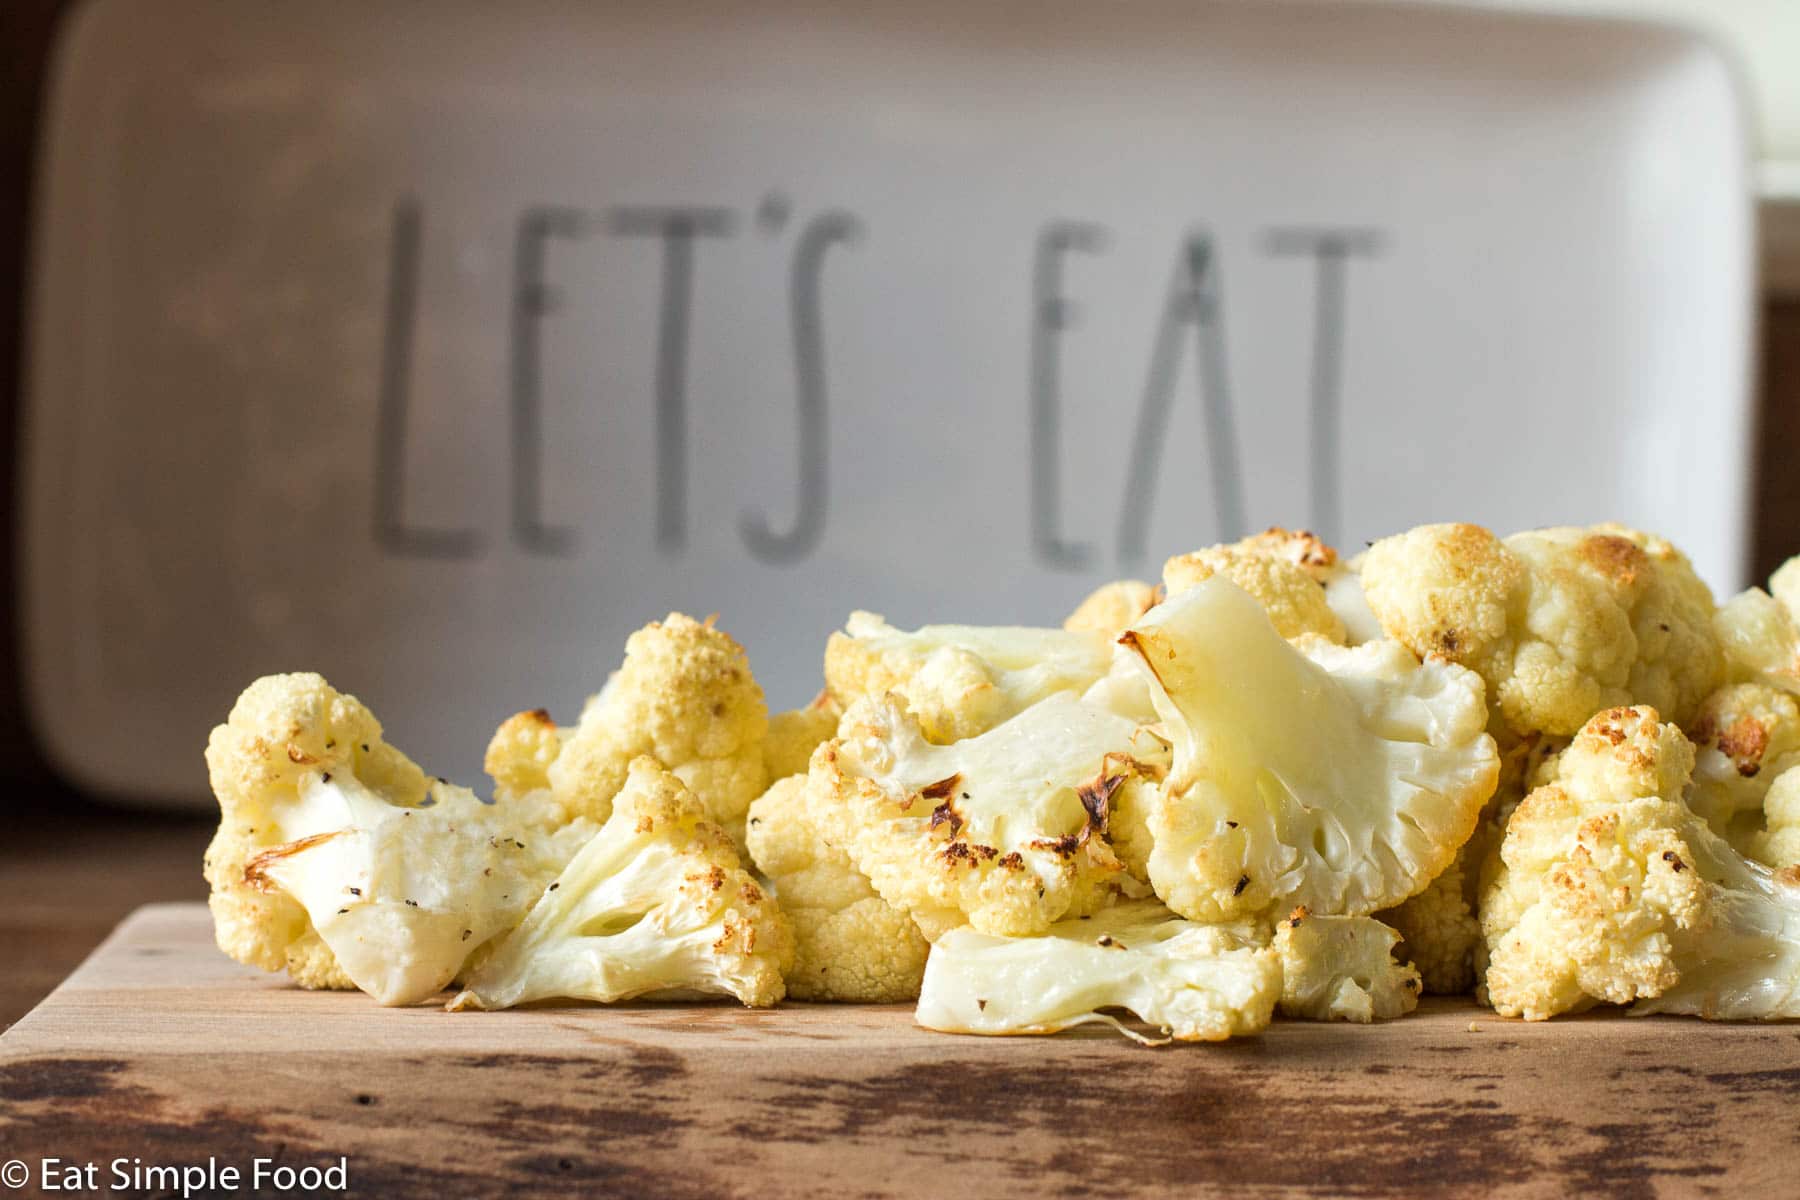 Cauliflower florets roasted brown on a wood cutting board with a white platter that says "let's eat" sitting behind it.